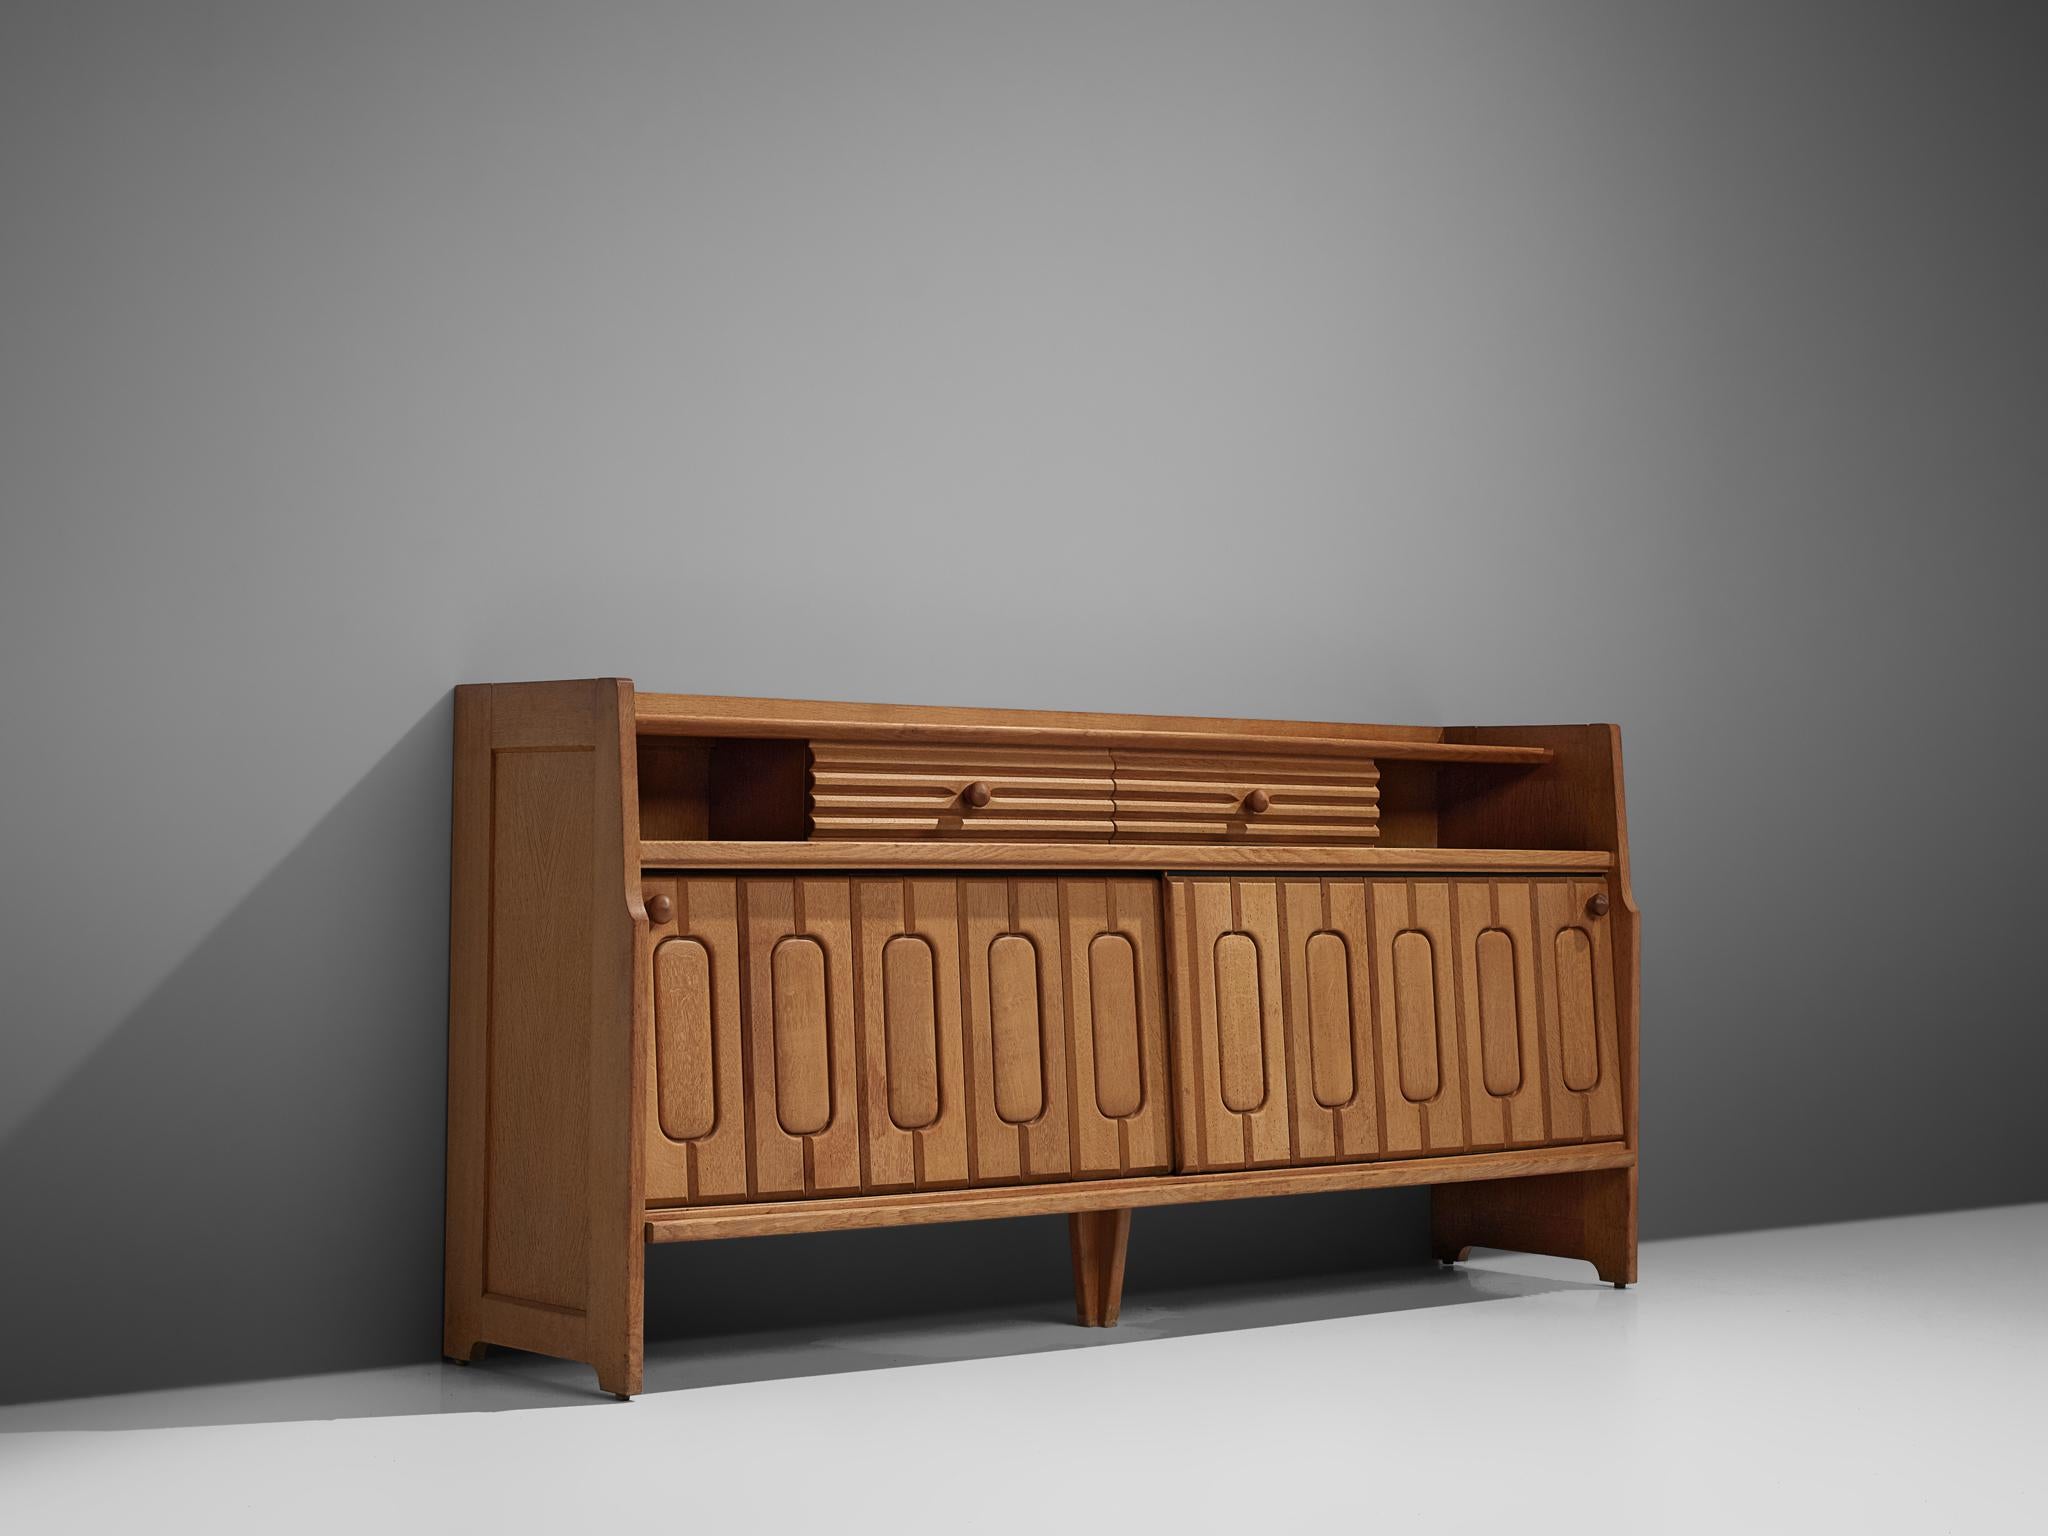 Guillerme et Chambron, sideboard, in oak and ceramic, France, 1960s.

Credenza in oak by French designer due Guillerme & Chambron. This sideboard is equipped with two sliding-doors and a set of drawers. The front of the sideboard is beautifully